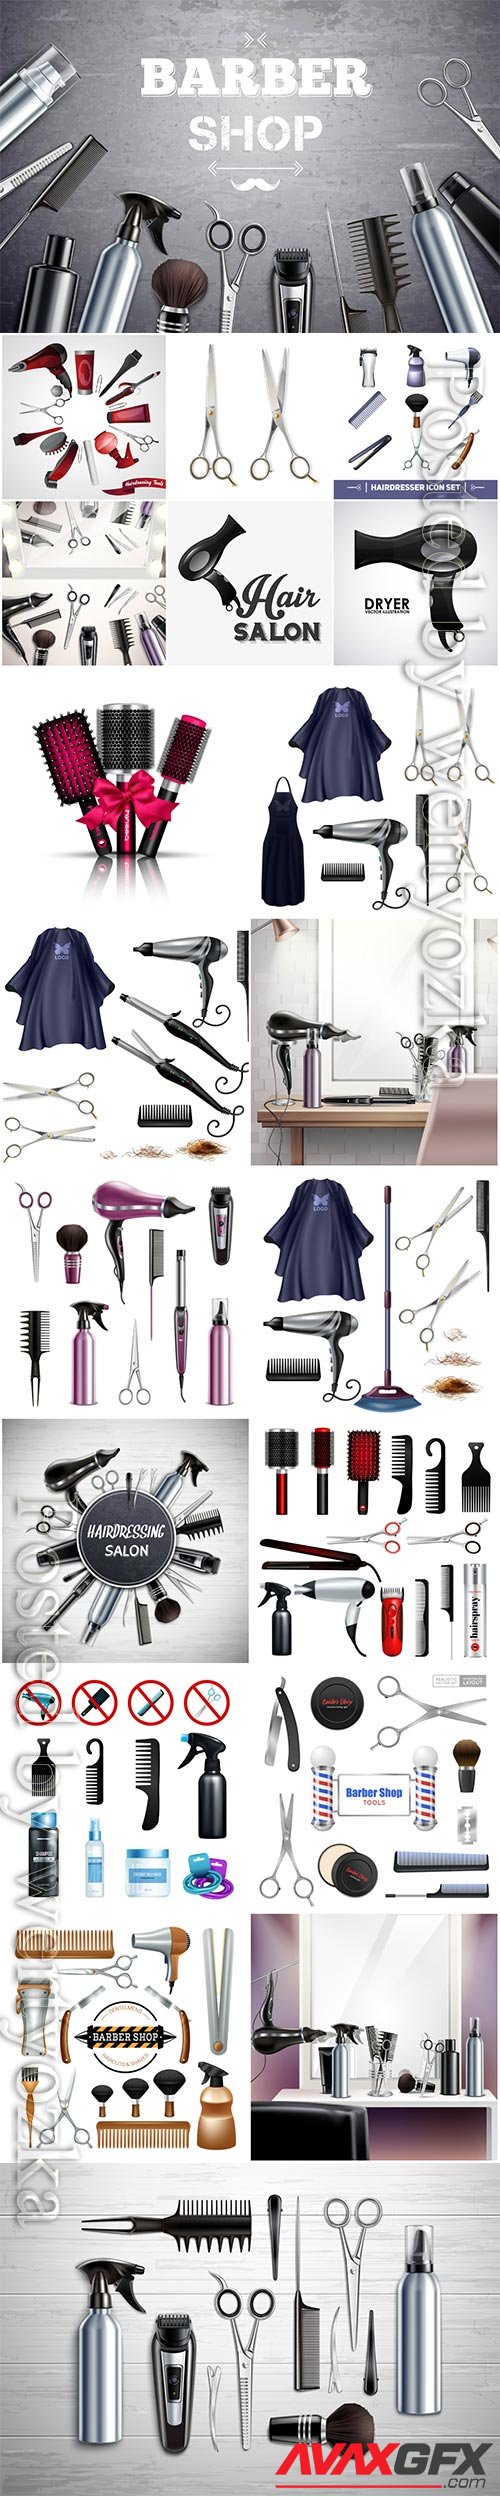 Barbershop hairdresser tools and accessories vector illustration